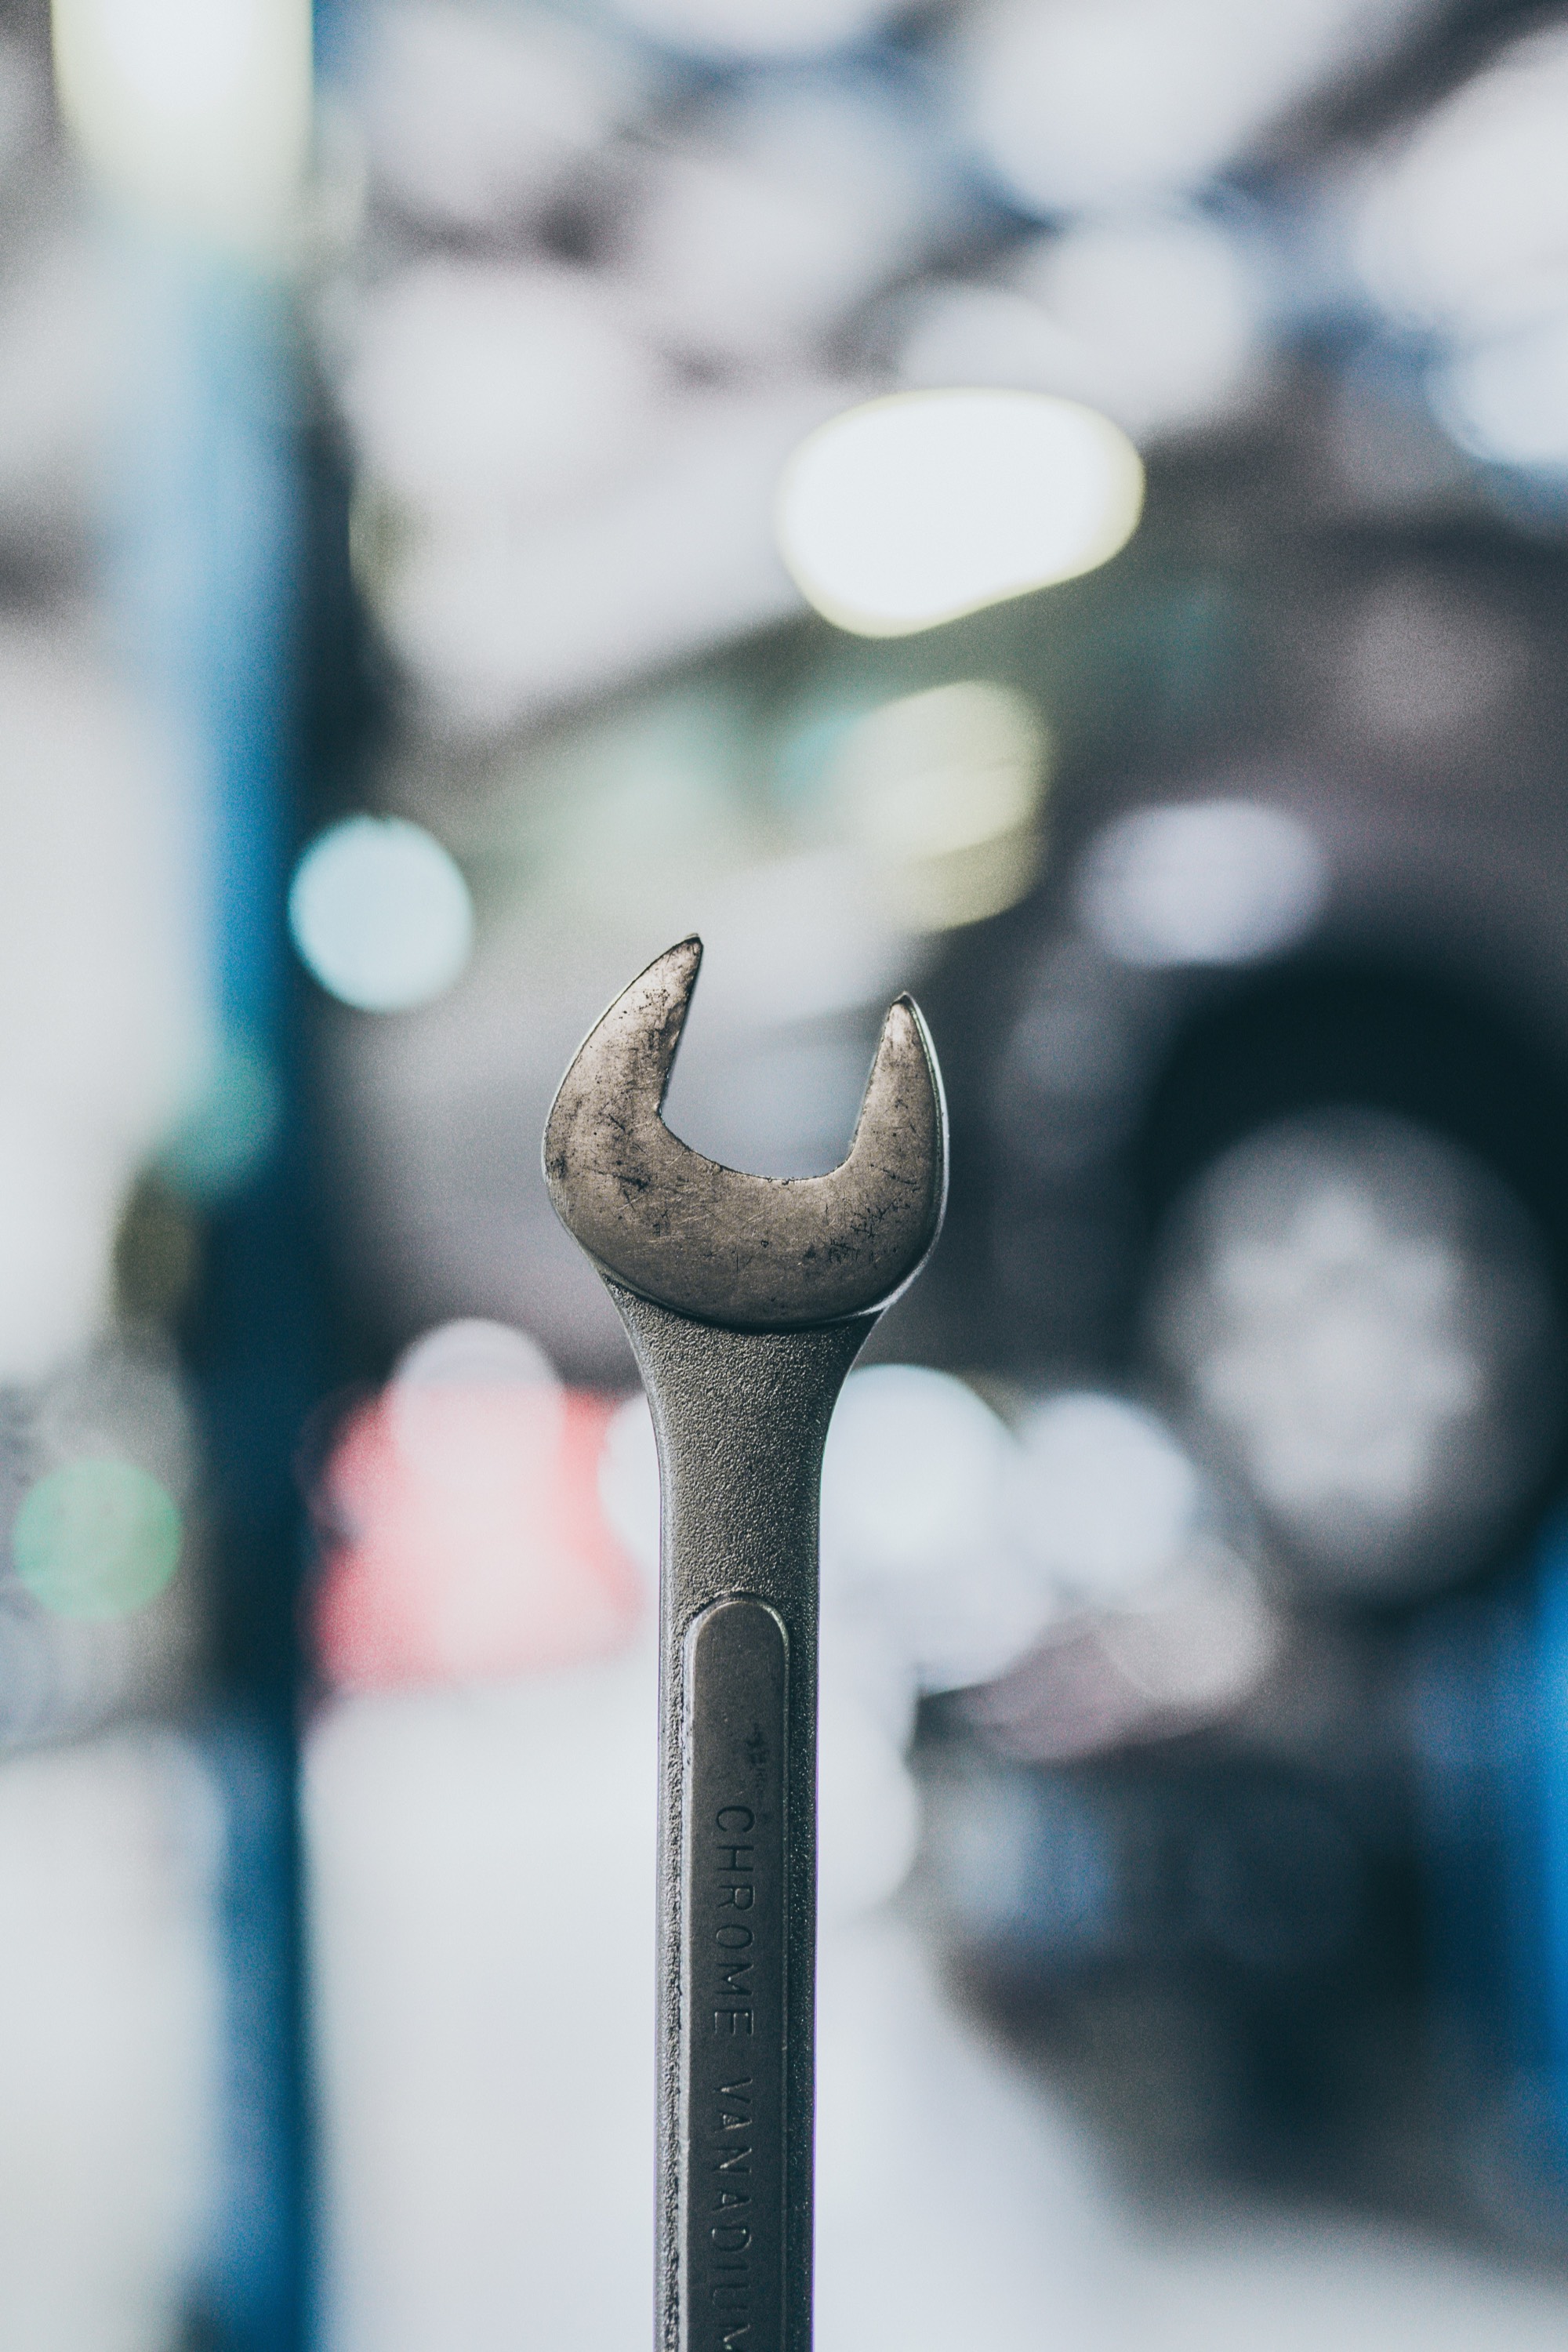 photograph of a wrench